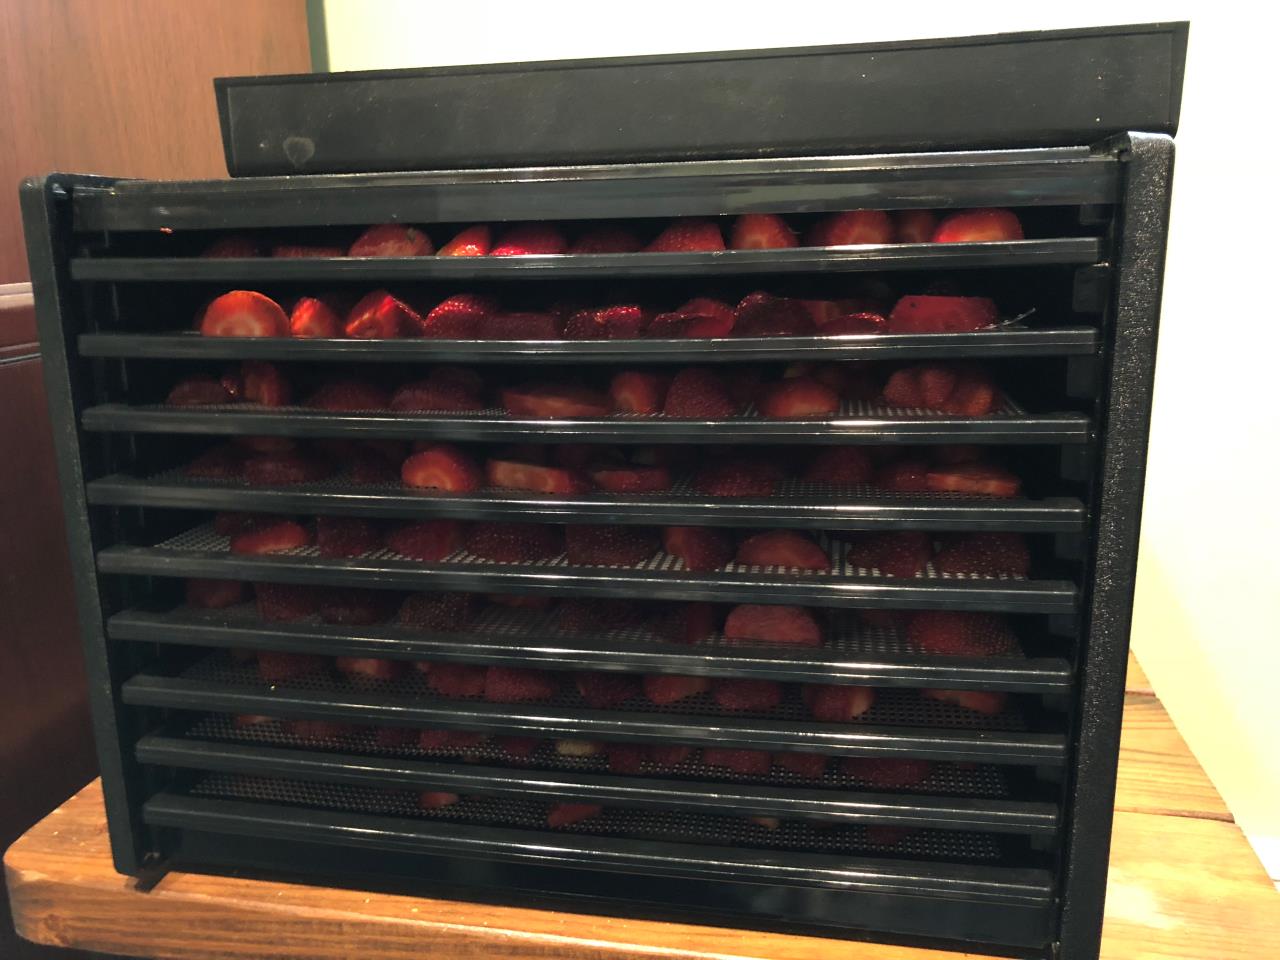 Dehydrating Strawberries - Northern New Jersey 